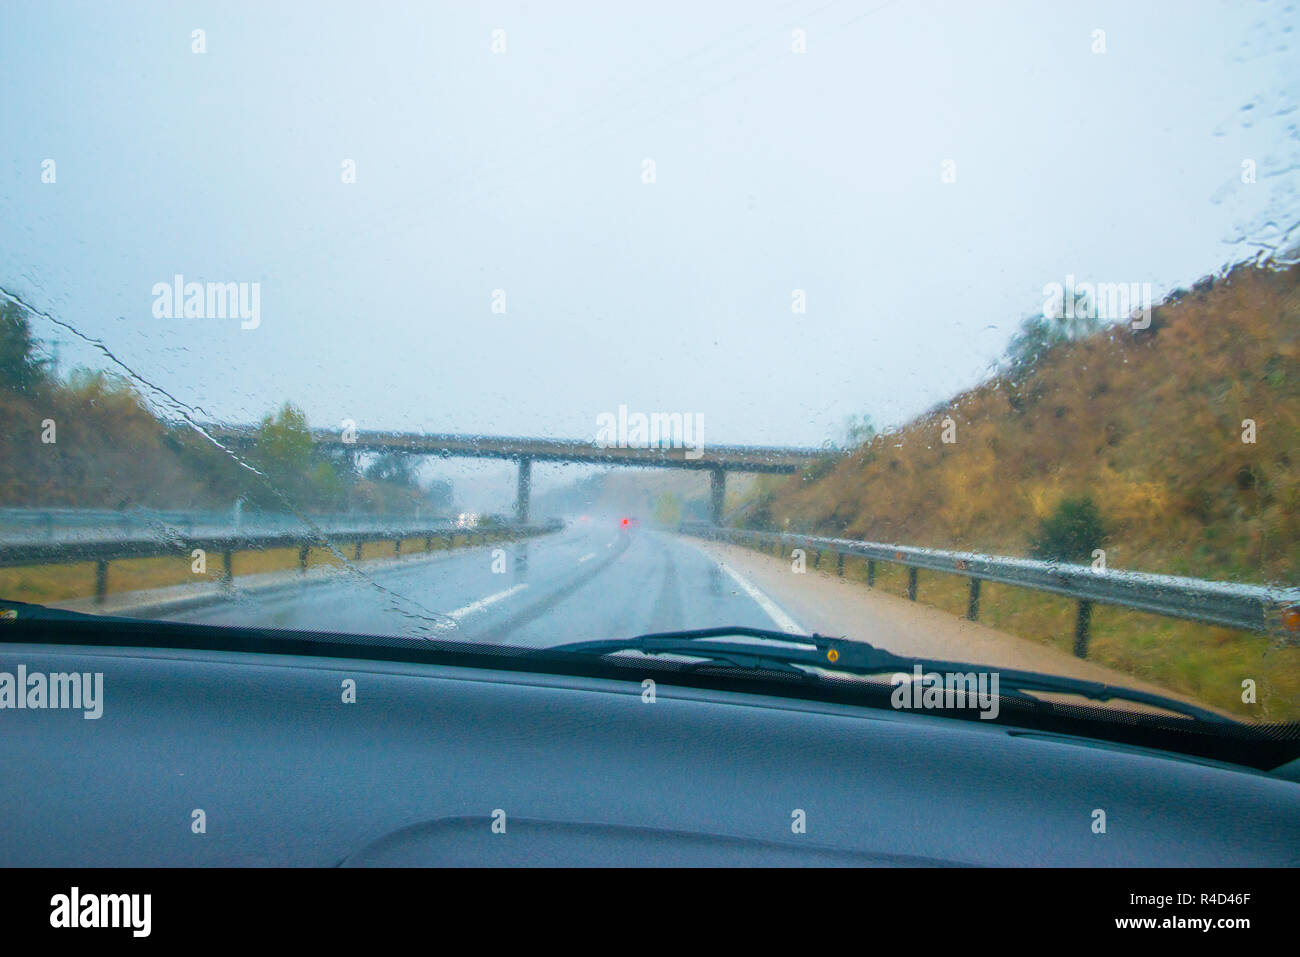 Freeway viewed from inside a car in a rainy day. Stock Photo